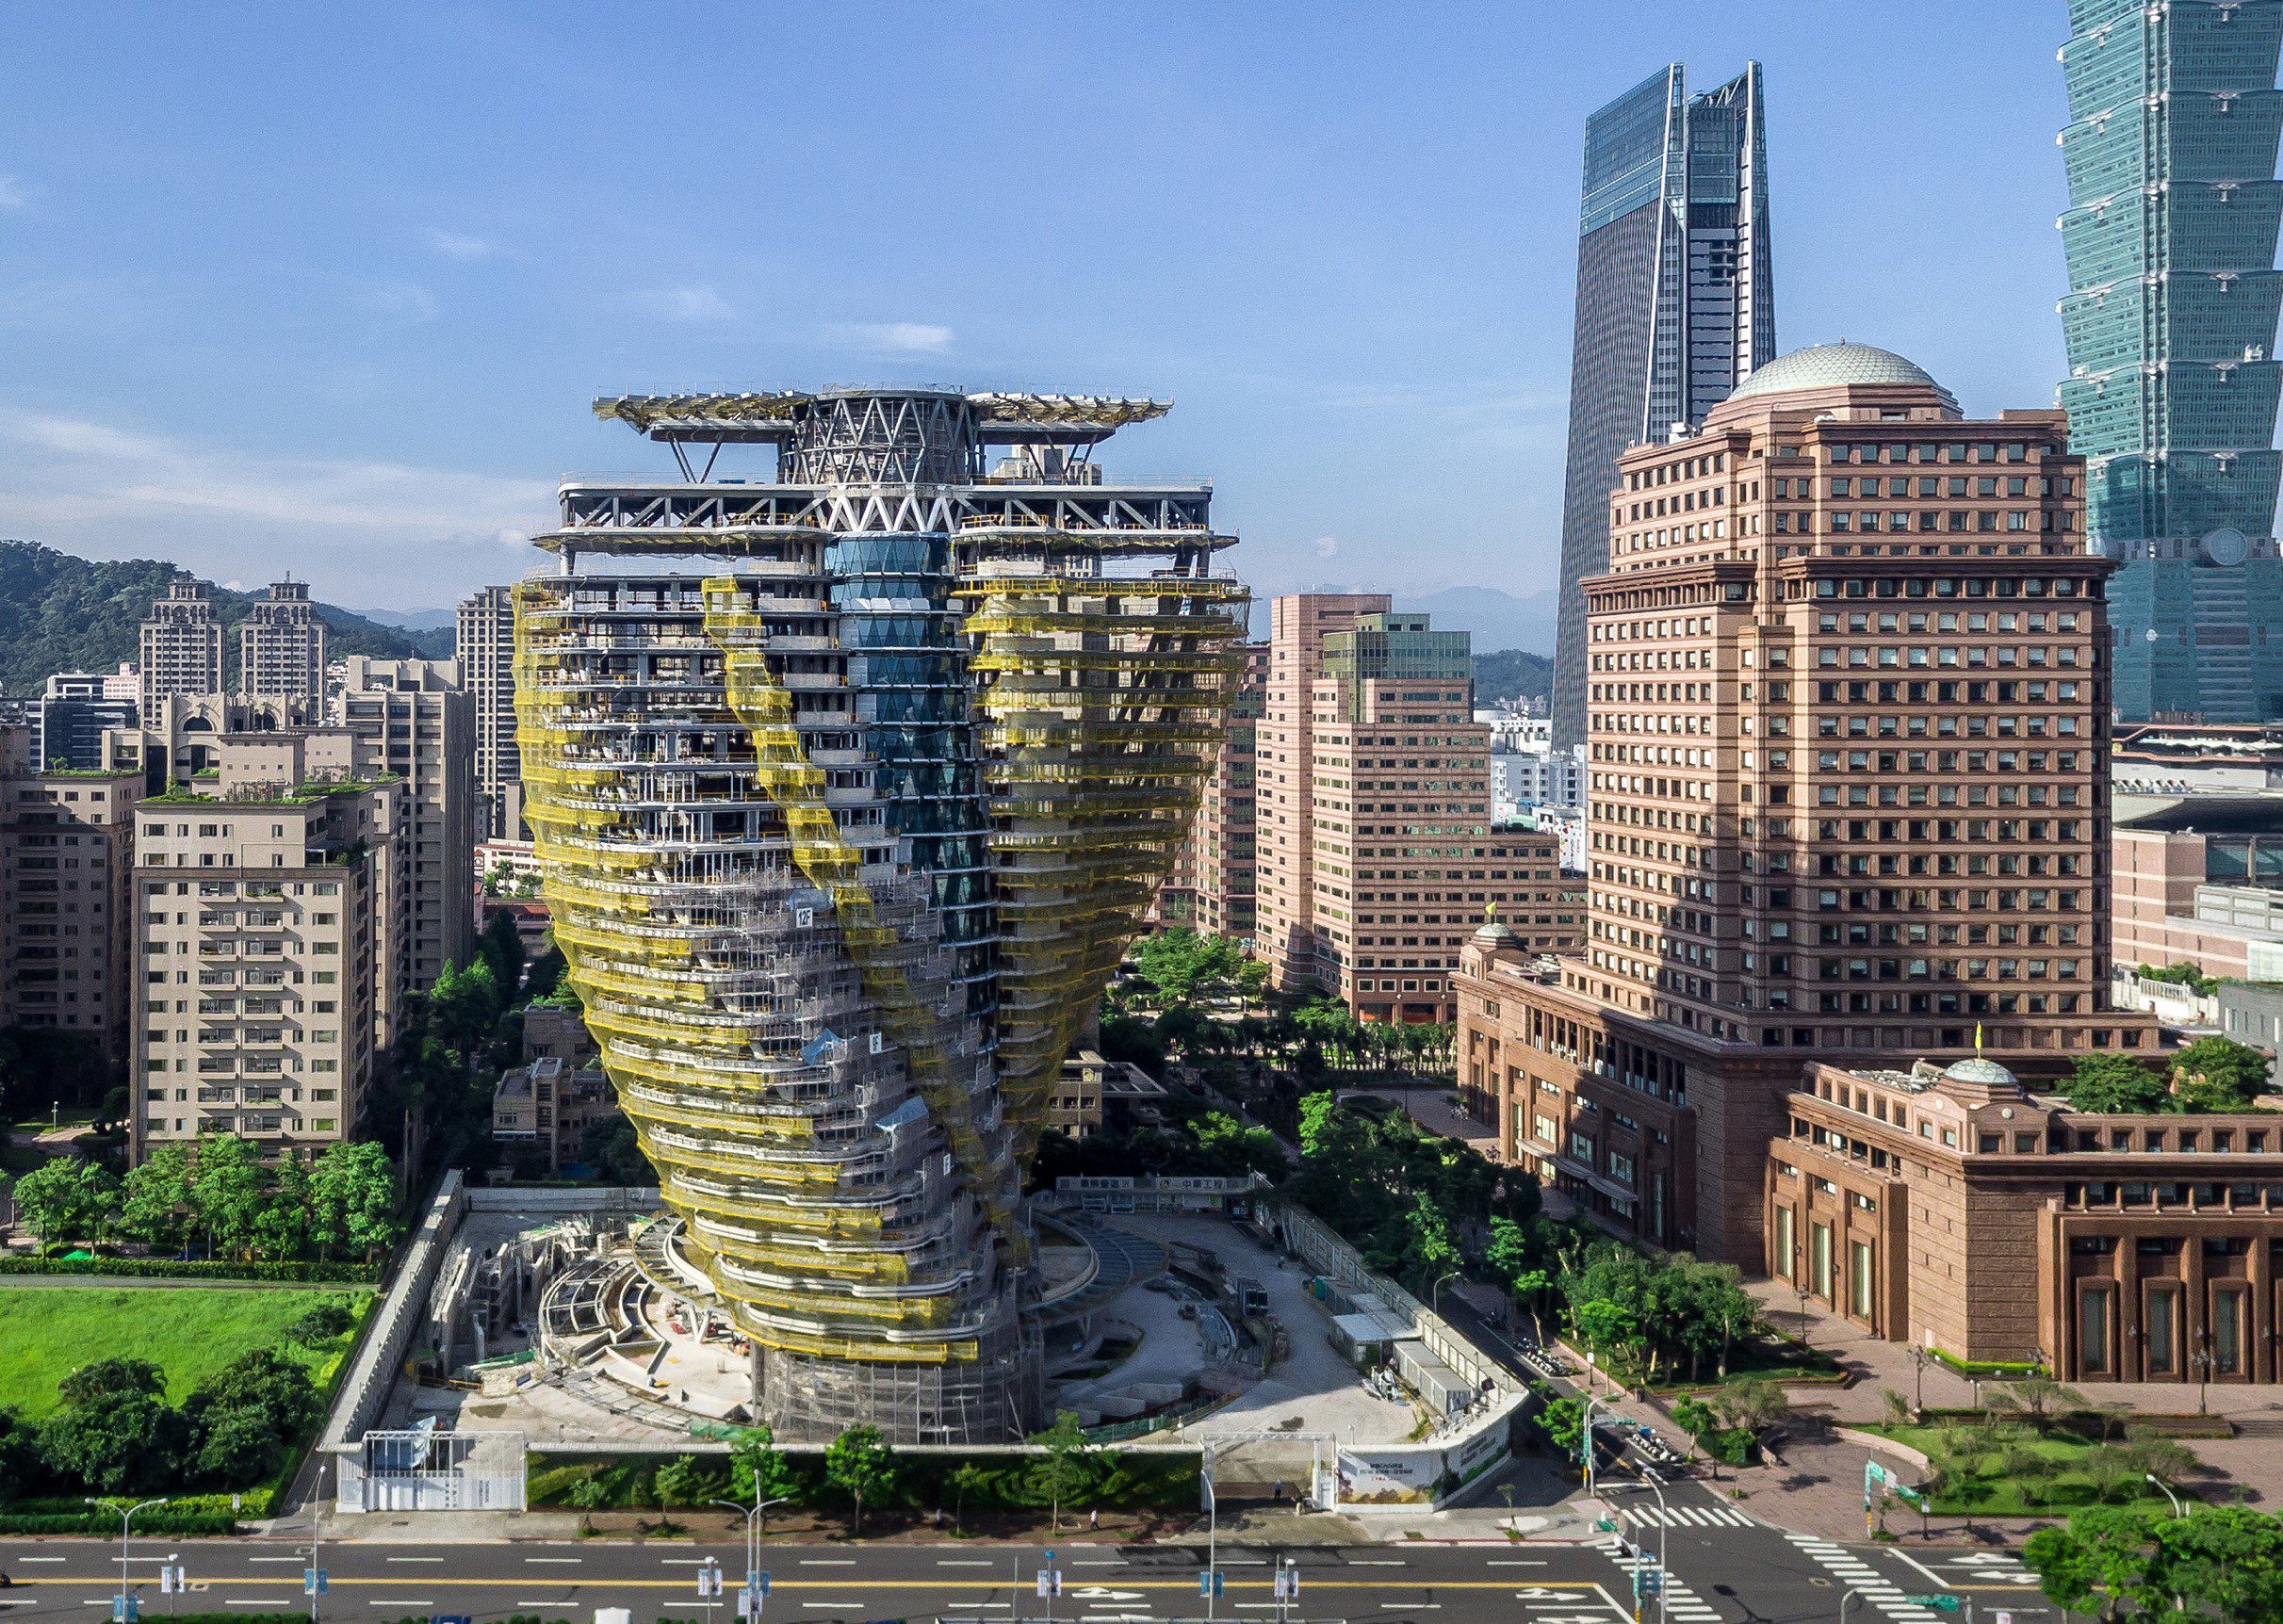 Taiwan's Agora Garden Smog-Eating Tower Will Feature Luxury Apartments